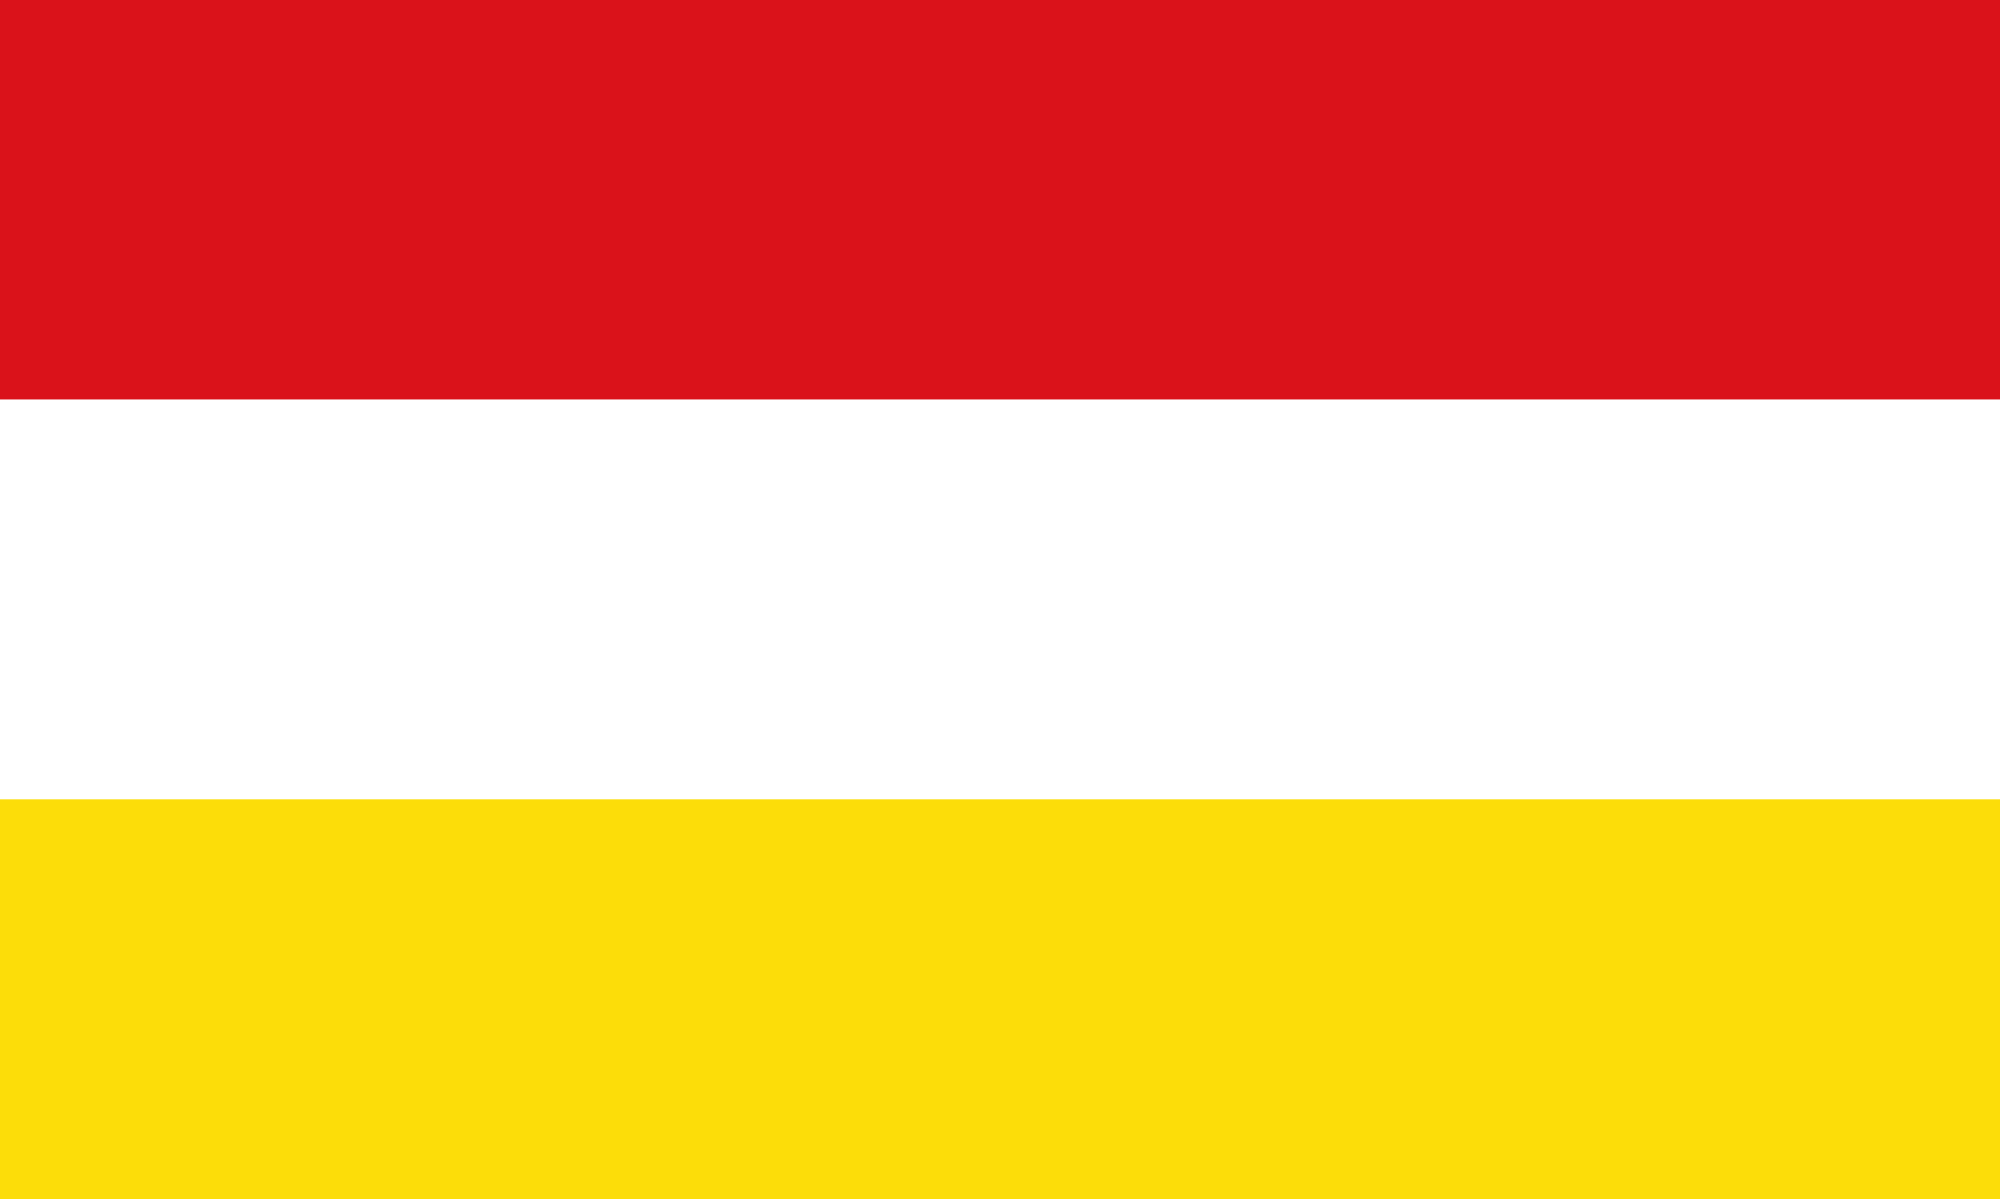 Red White and Yellow Logo - File:Flag red white yellow 5x3.svg - Wikimedia Commons